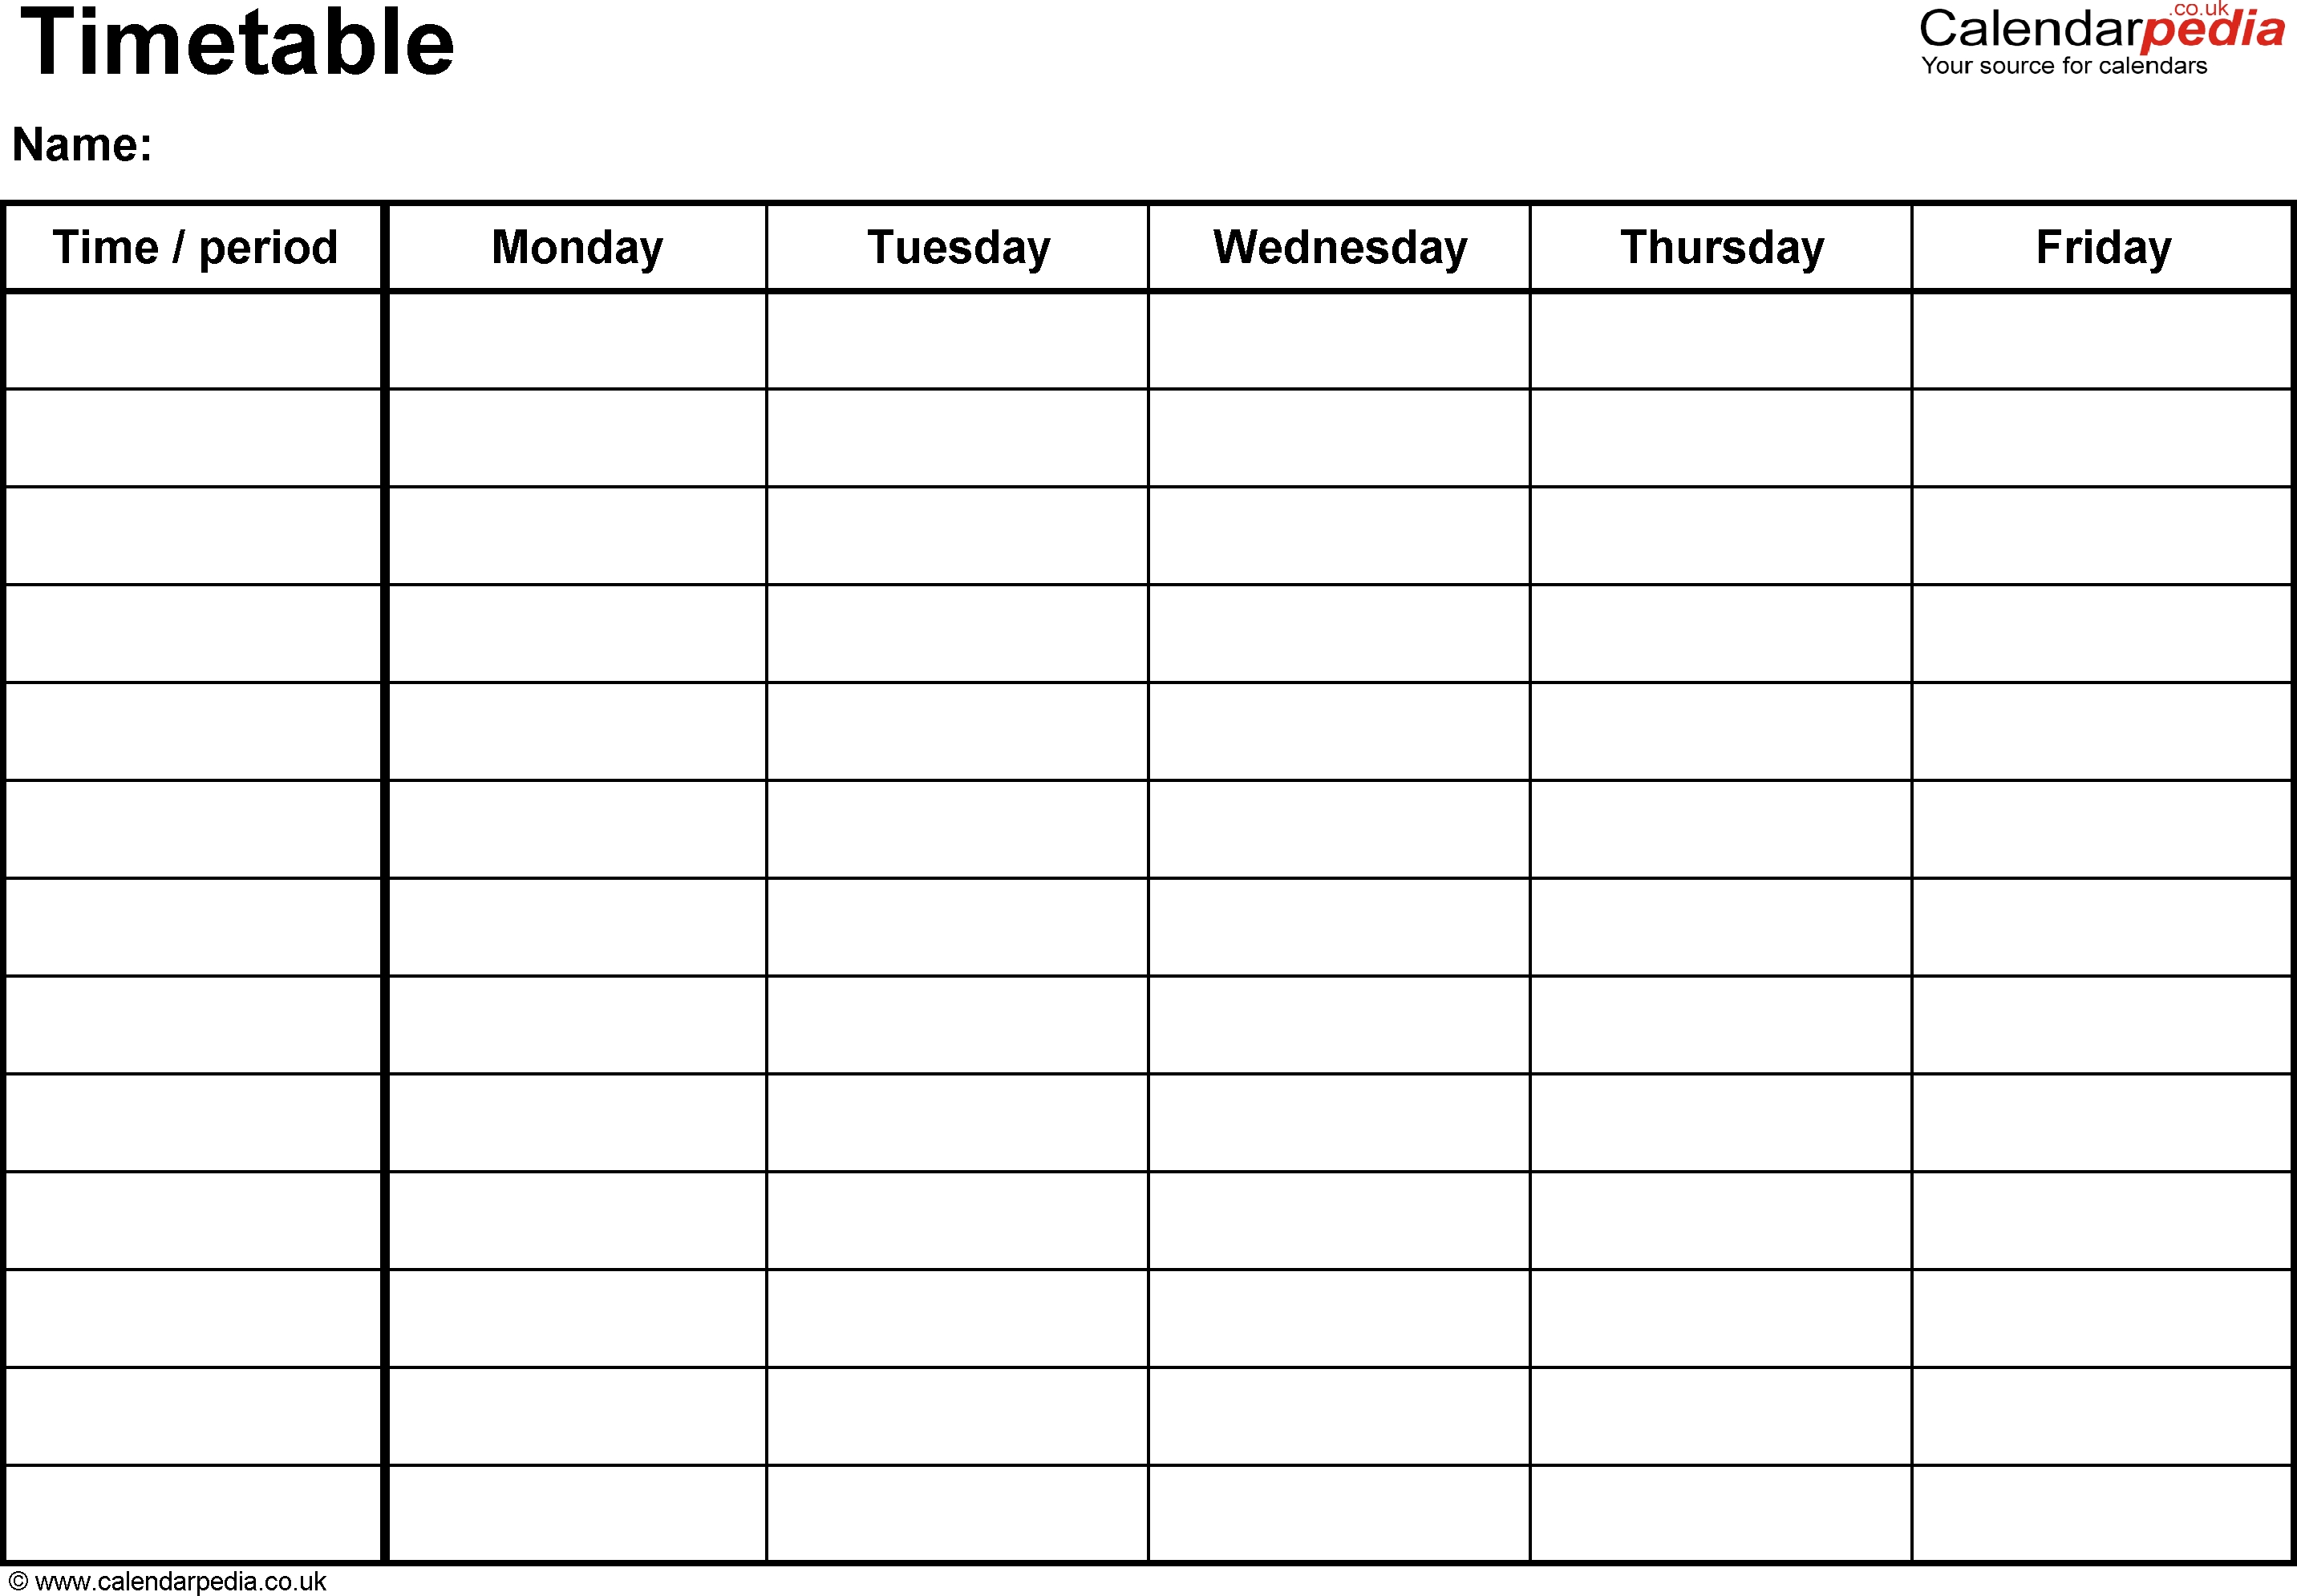 Timetables As Free Printable Templates For Microsoft Excel pertaining to 5 Day Weekly Timetable Blank 6 Periods